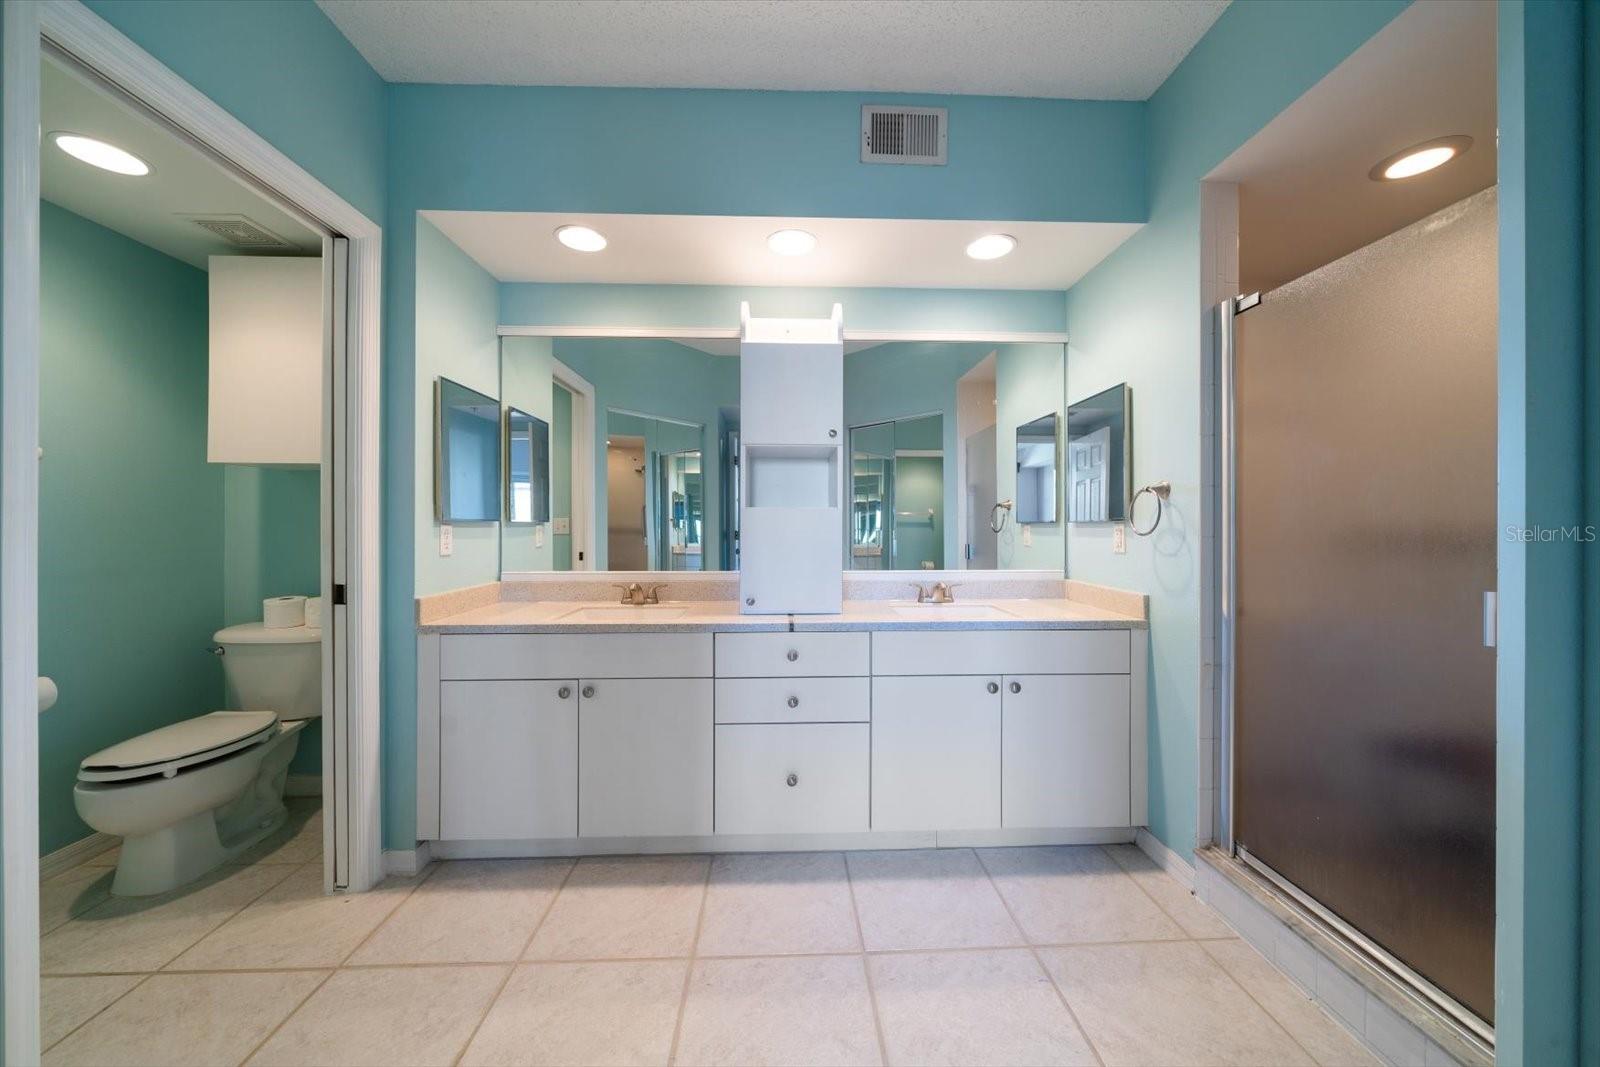 SPACIOUS PRIMARY BATHROOM WITH DUAL SINKS, WATER CLOSET, TWO WALK-IN CLOSETS AND ROOMY SHOWER.